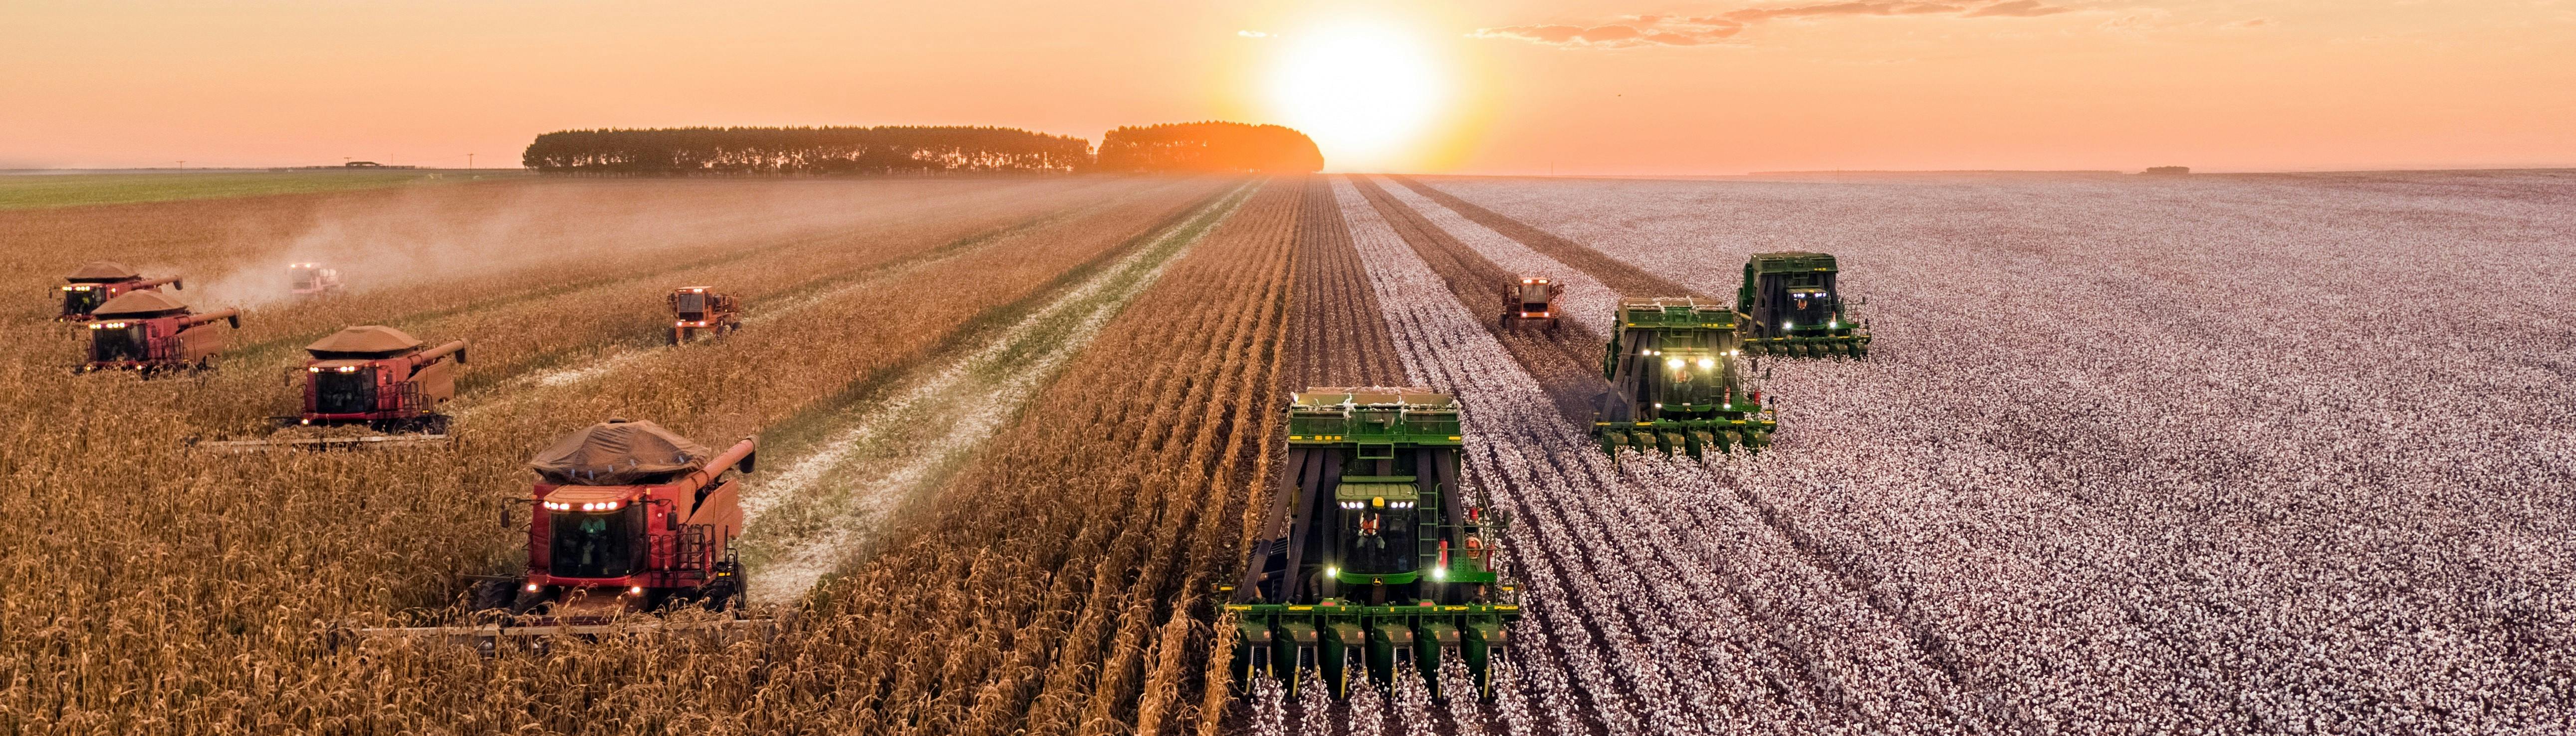 Why You Should Study a Master's in Agricultural Economics in 2020 -  MastersPortal.com